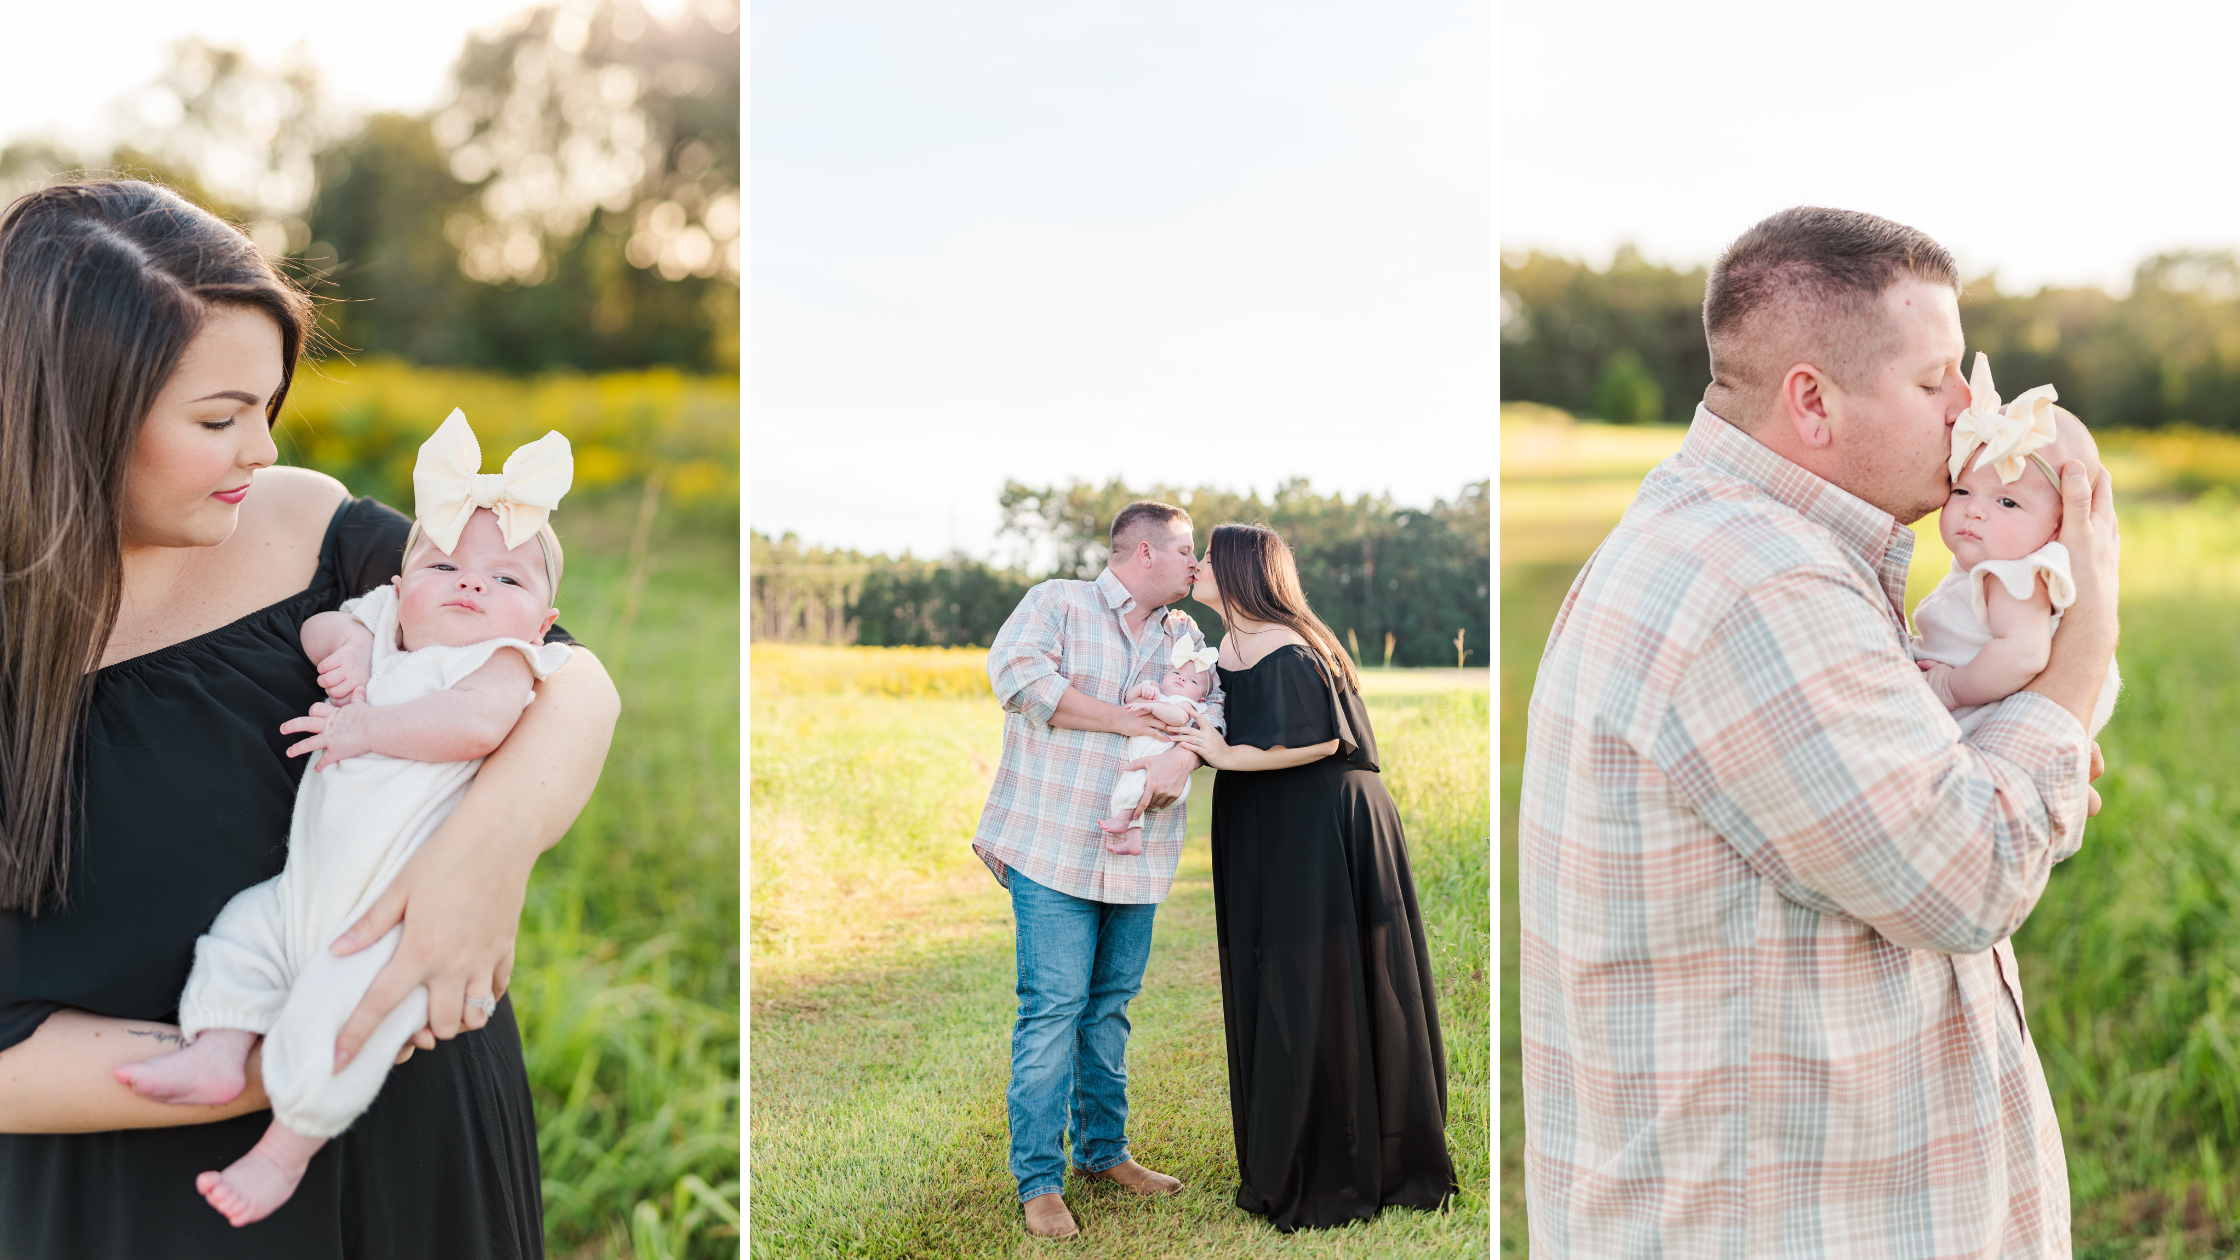 Fall Family Mini Photoshoot in Mobile, Alabama Photographed by Kristen Marcus Photography